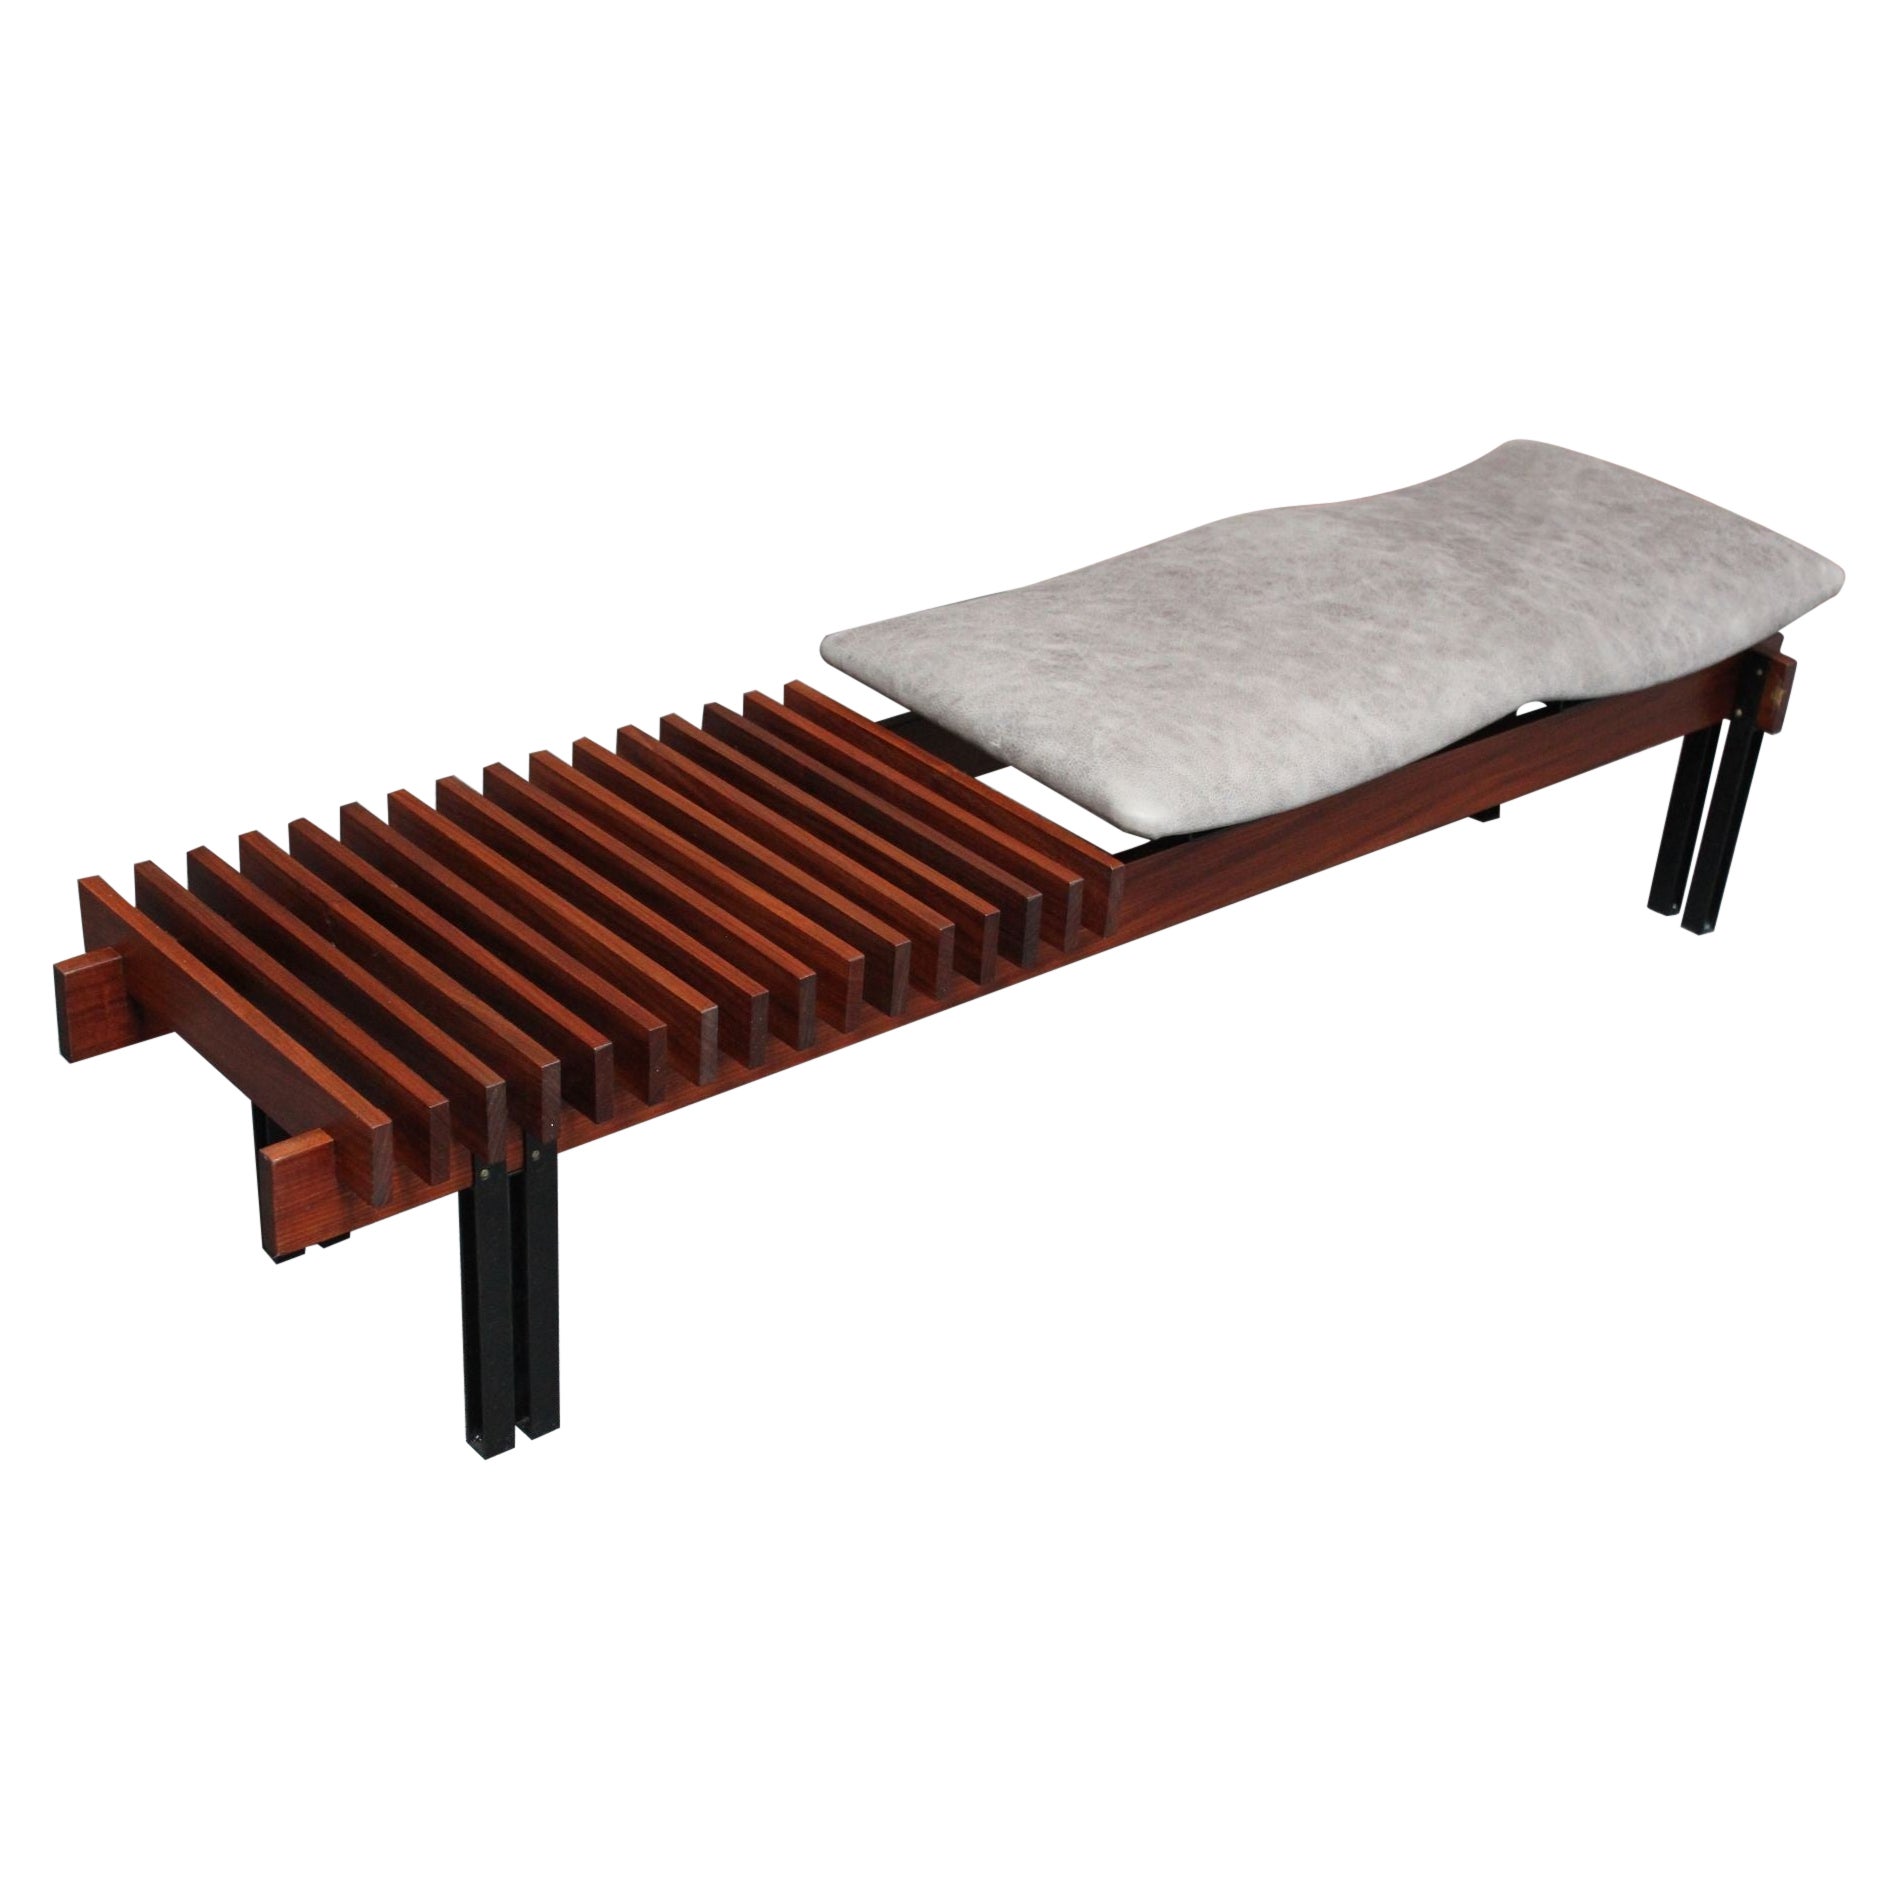 Italian Modernist Teak and Leather Bench by Inge and Luciano Rubino For Sale